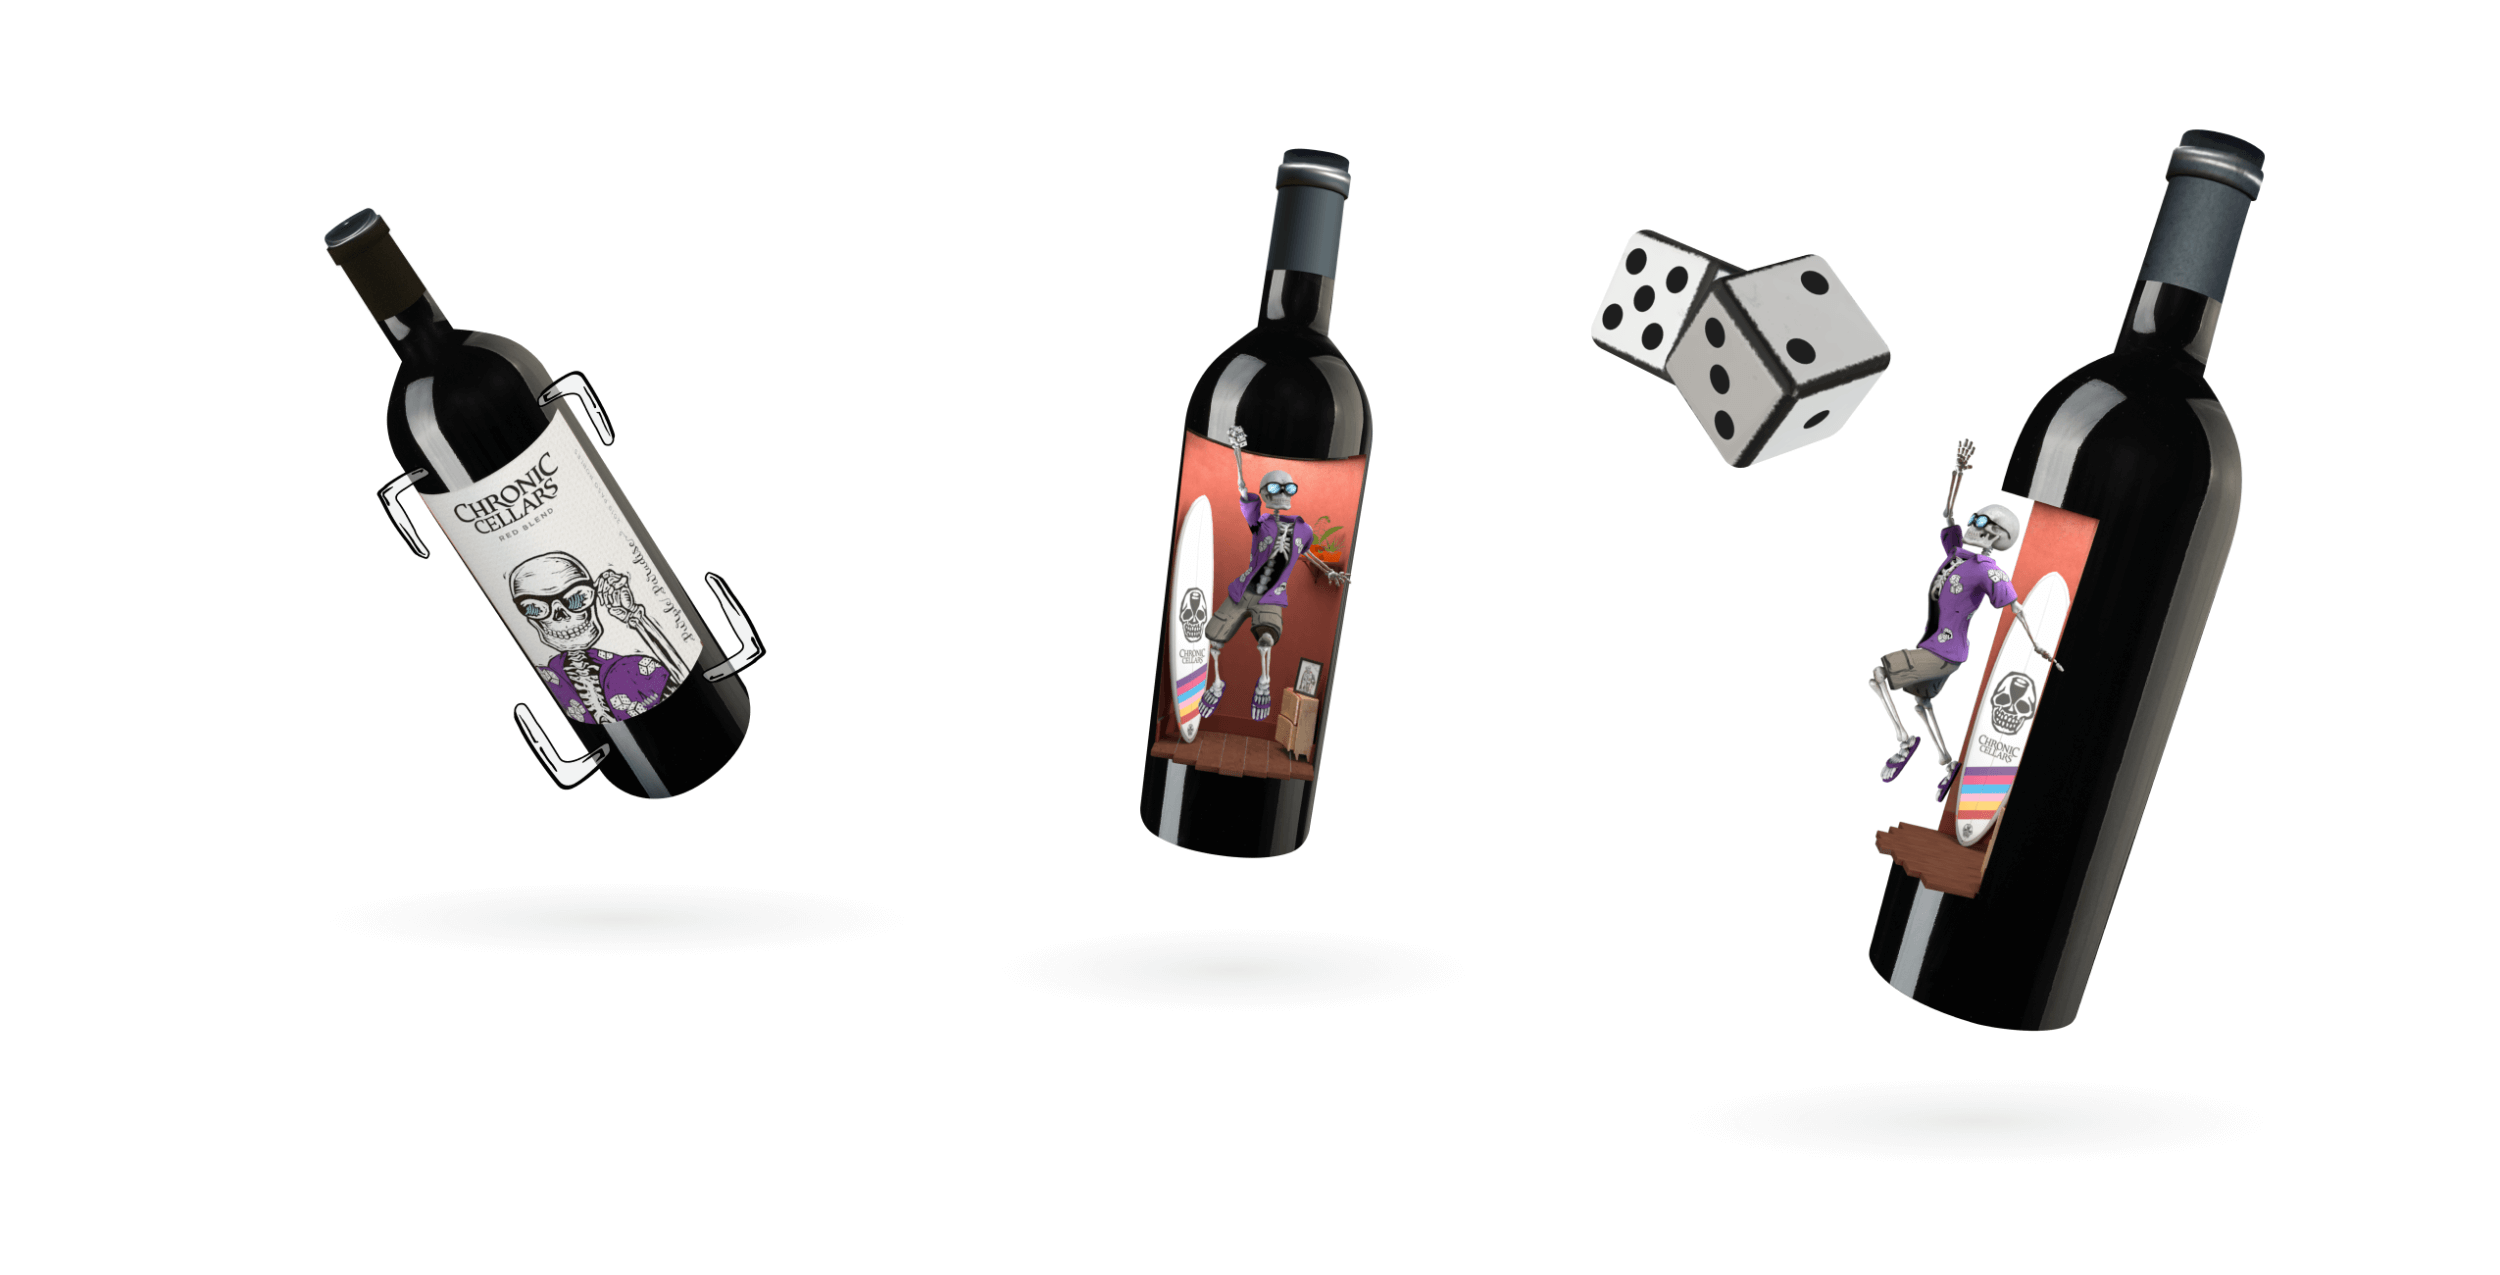 A left-to-right visual representation of the Chronic Cellars immersive experience displaying 3 3D wine bottles and a skeleton emerging from the final bottle